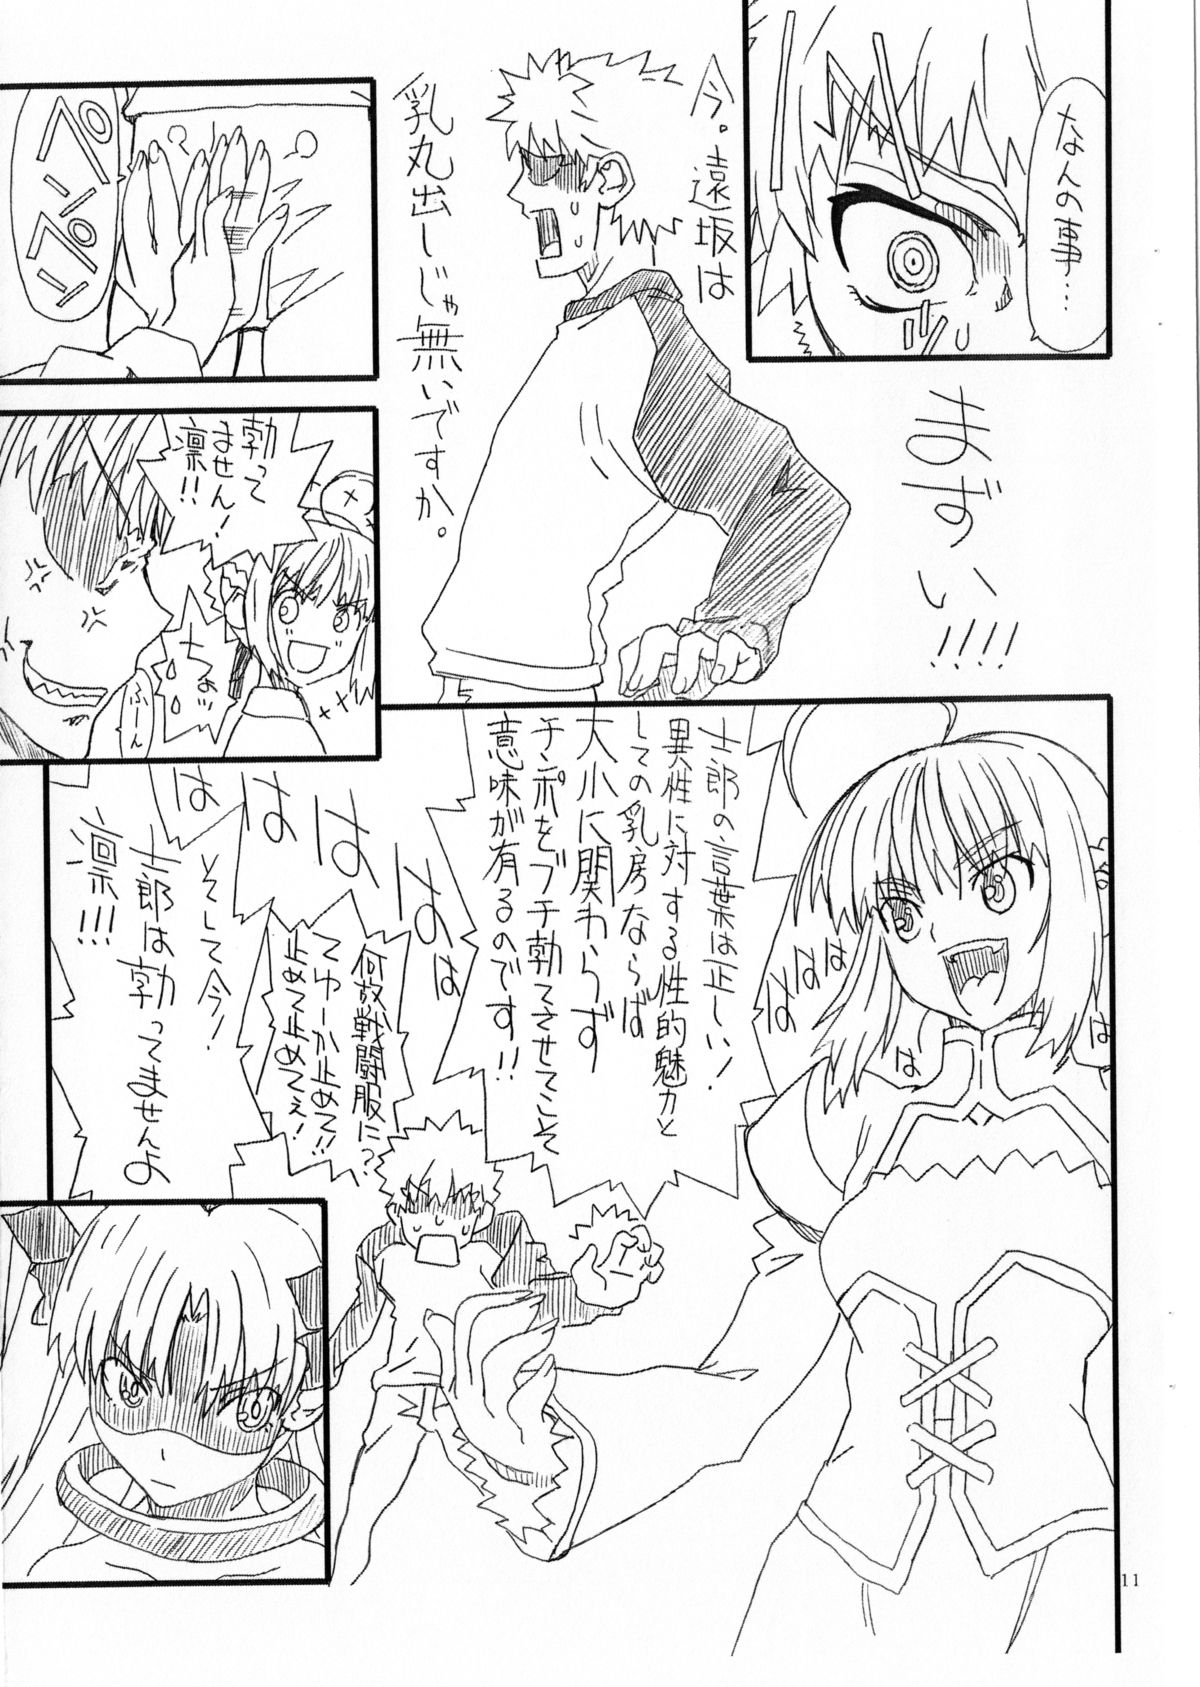 (SC65) [Power Slide (Uttorikun)] Rin to saber 1st Ver0.5 (Fate/stay night) page 12 full